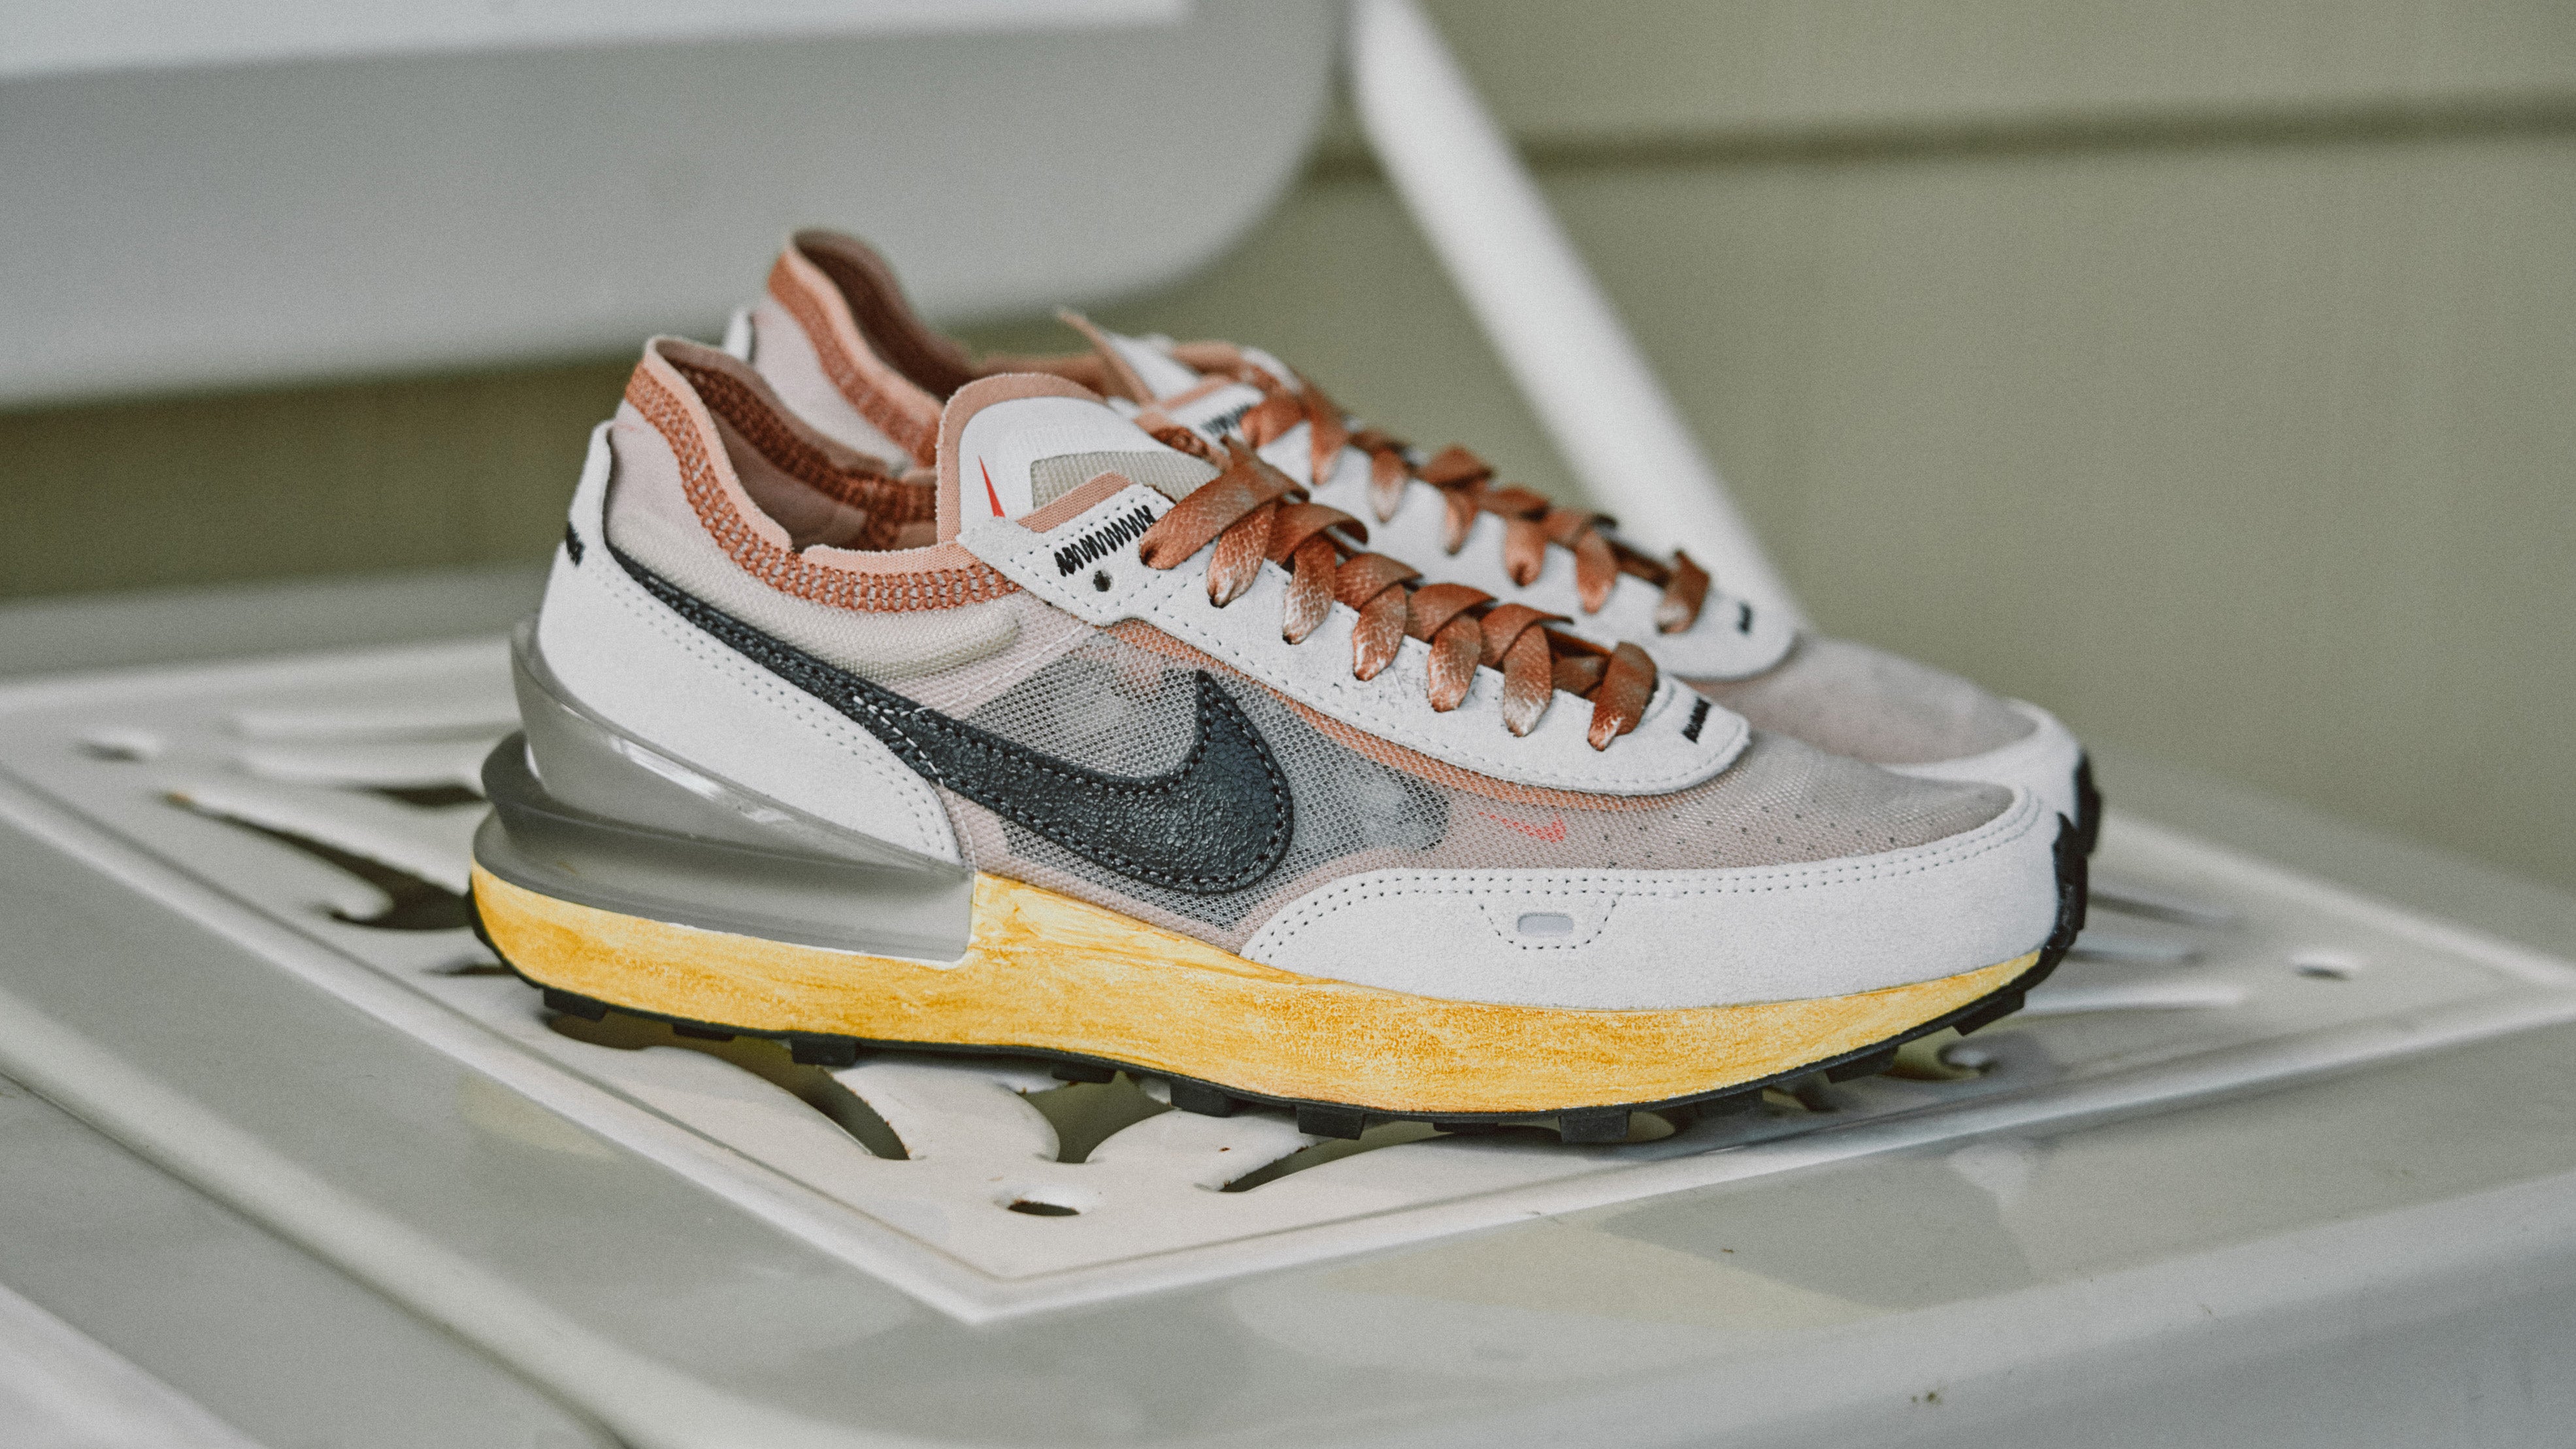 A New Classic Debut The Nike Waffle One Whitaker Group Exclusive